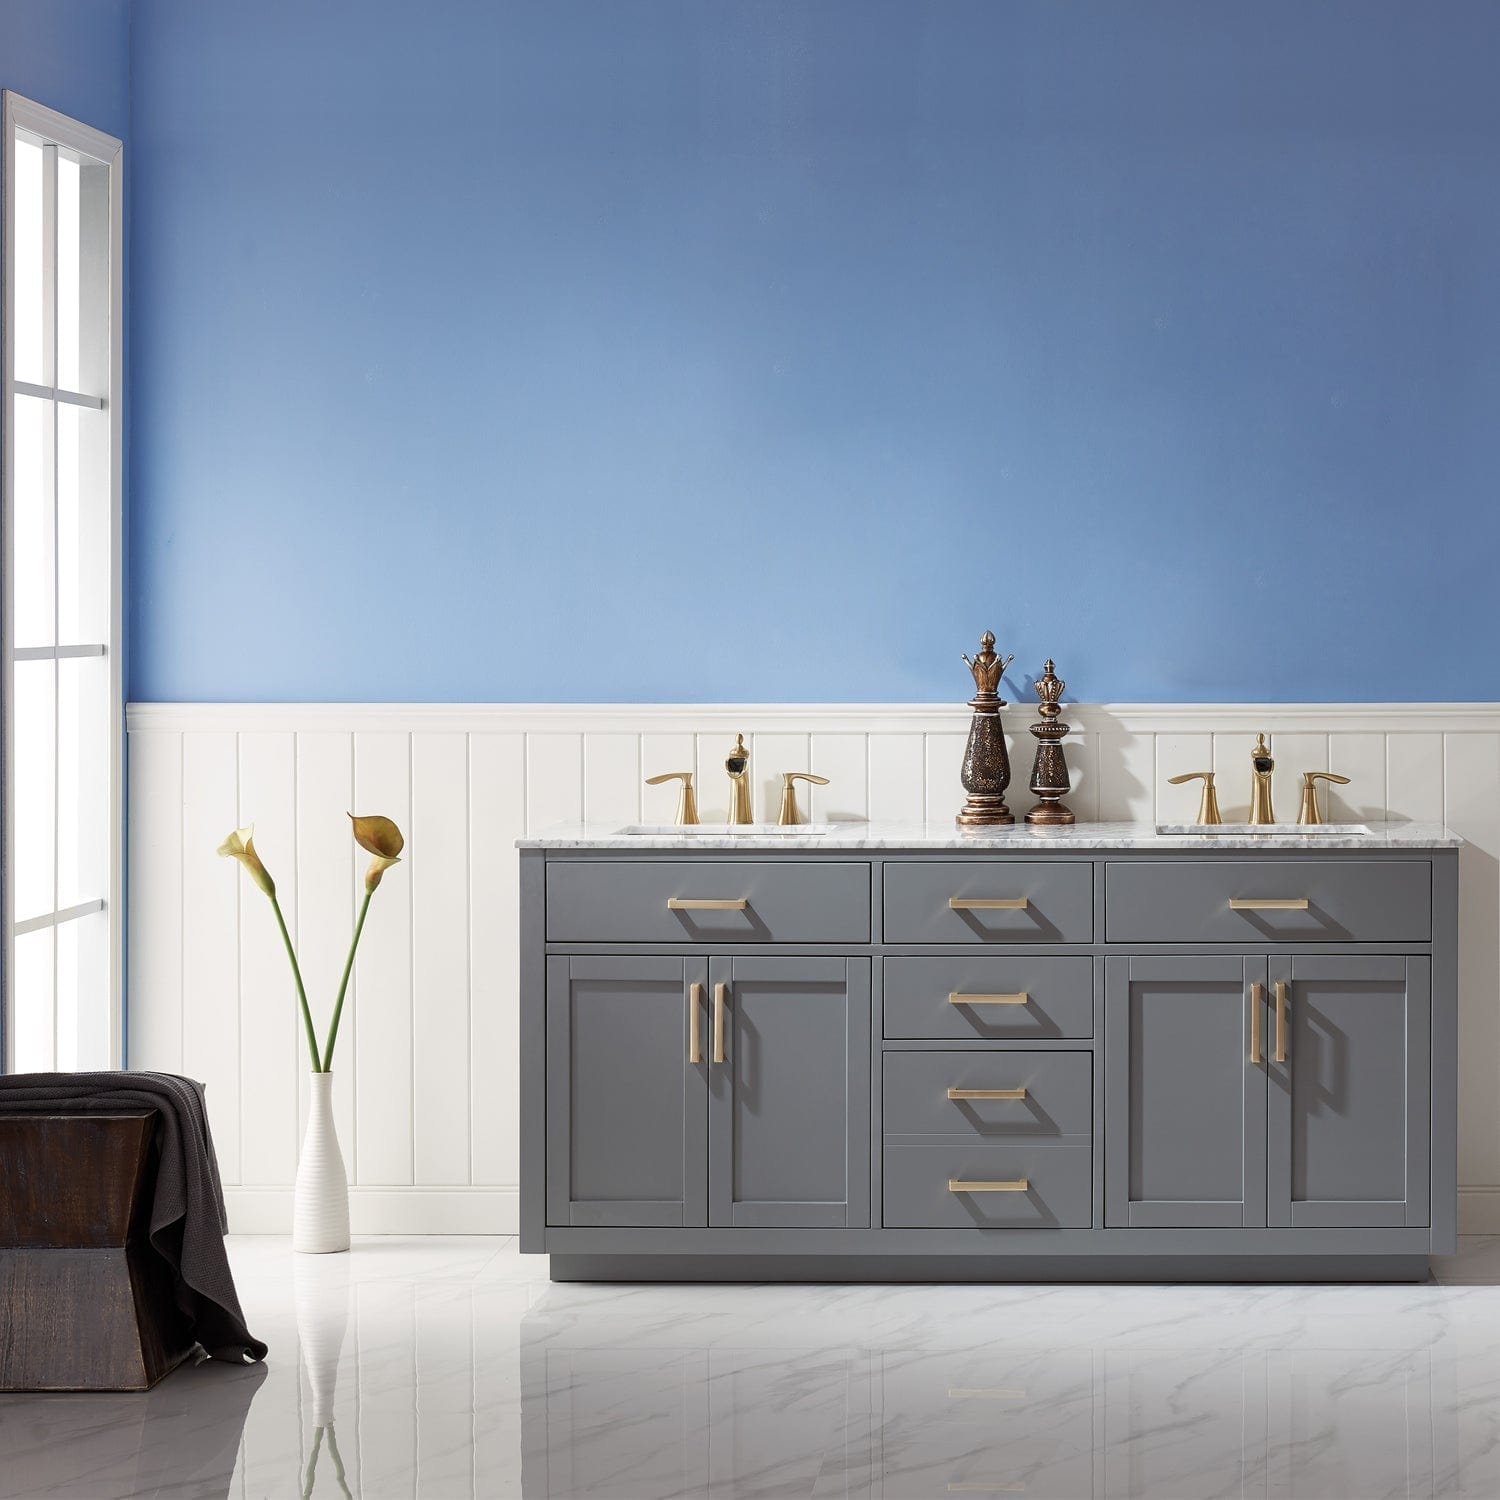 Altair Ivy 72" Double Bathroom Vanity Set in Gray and Carrara White Marble Countertop without Mirror 531072-GR-CA-NM - Molaix631112971287Vanity531072-GR-CA-NM